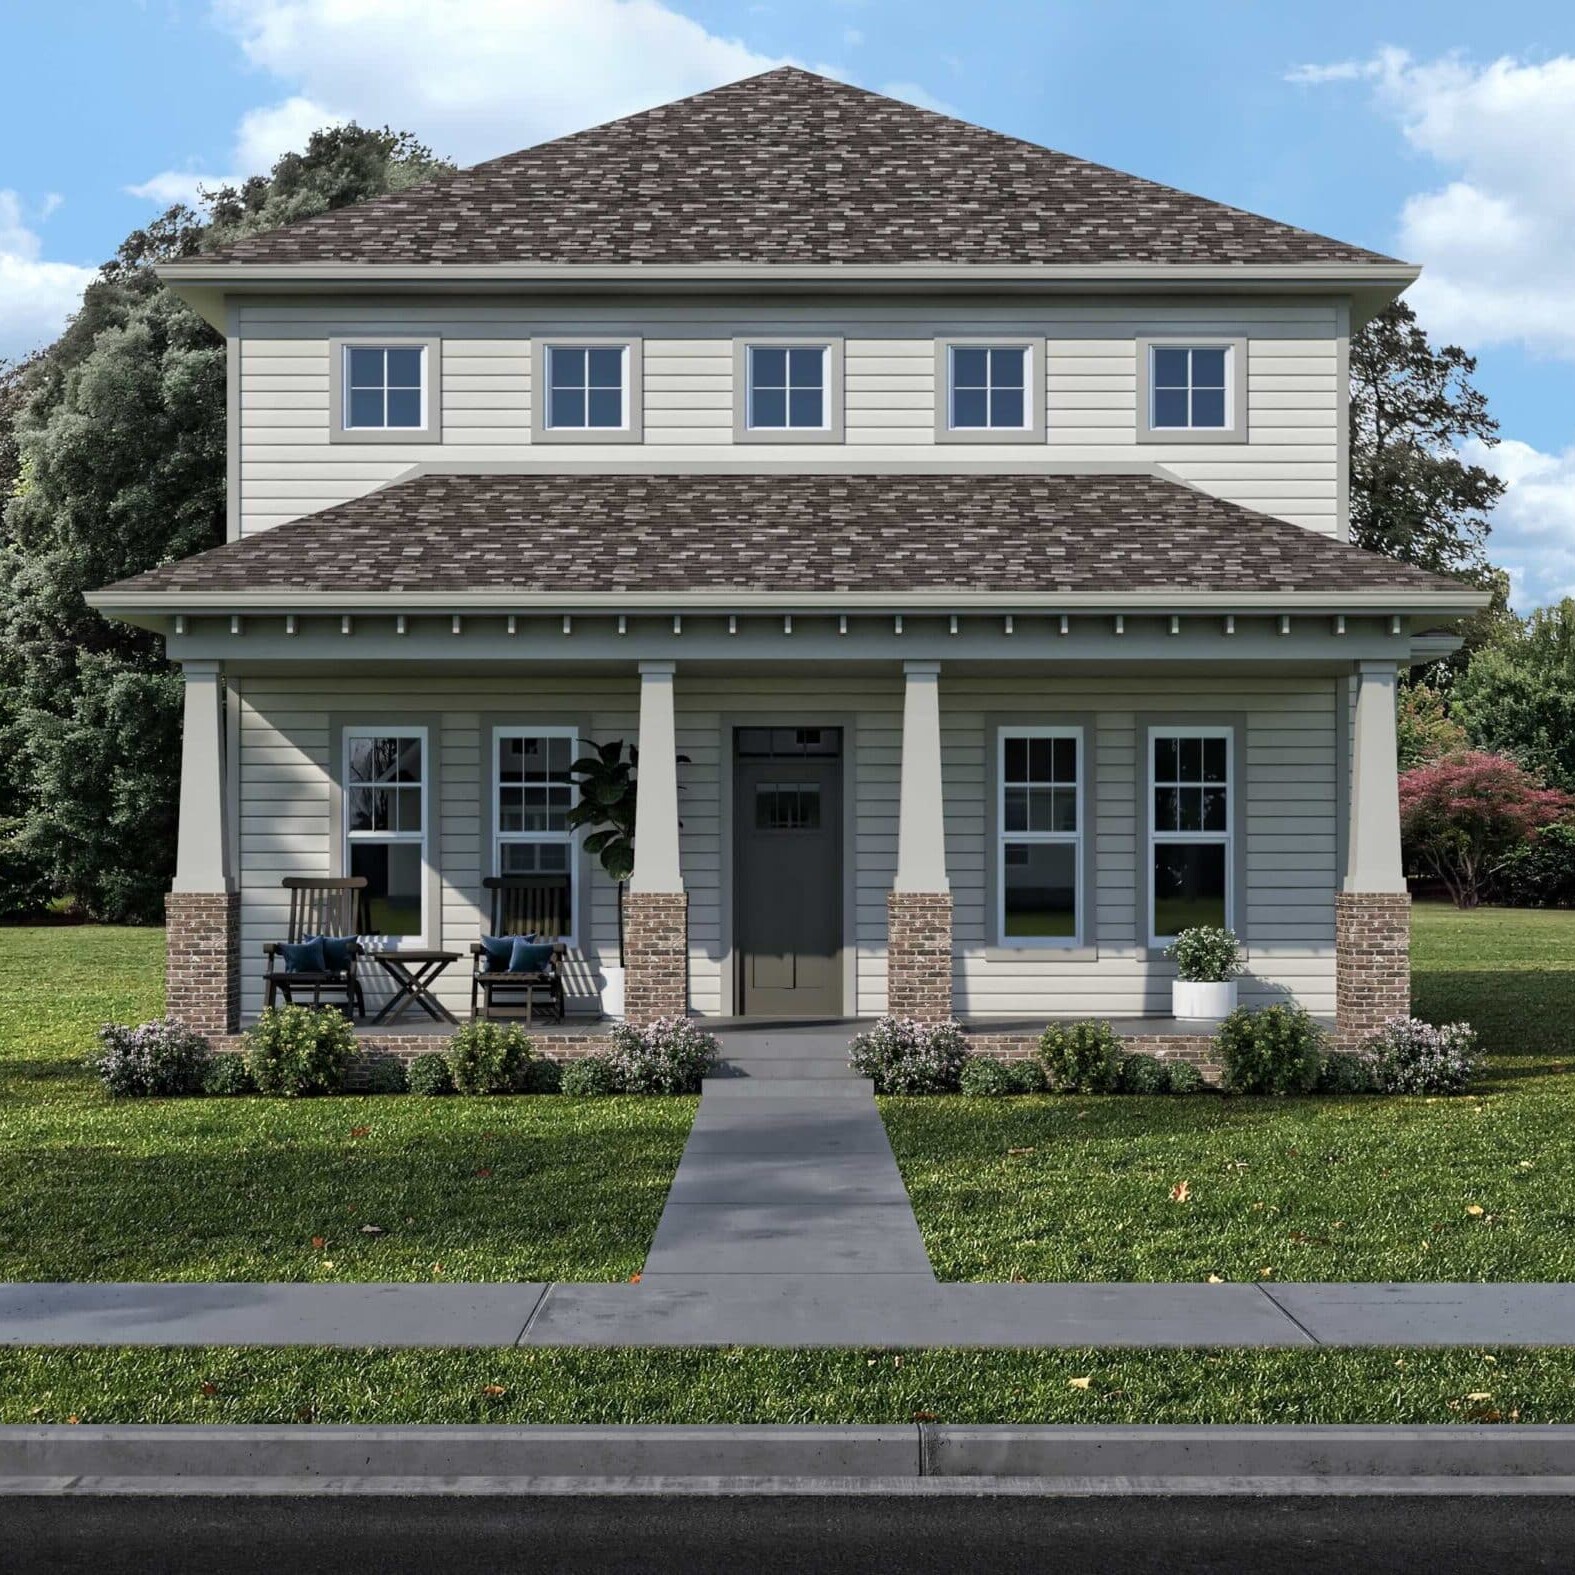 A rendering of a luxury custom home with a front porch in Fishers Indiana.